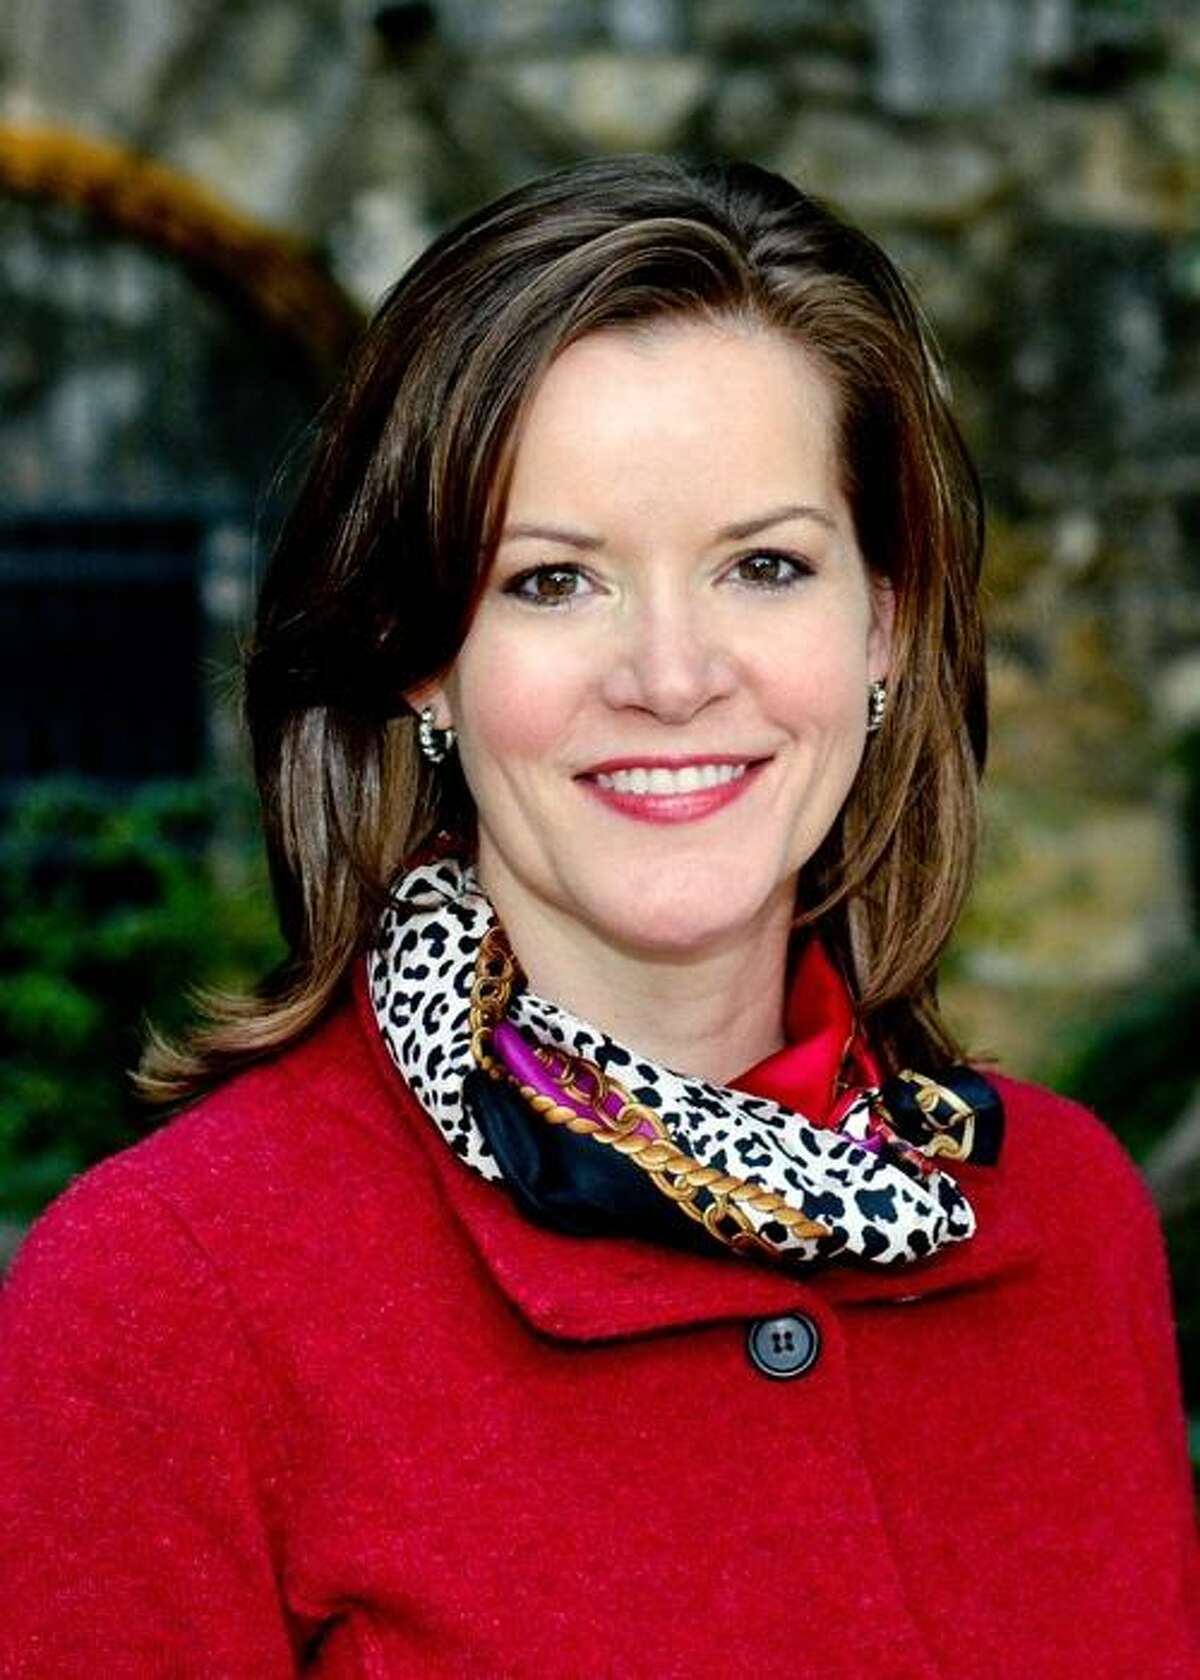 Becky Dinnin was a vice president with the San Antonio Chamber of Commerce before becoming director of the Alamo in 2015. More recently, she was executive director of Remember the Alamo Foundation.